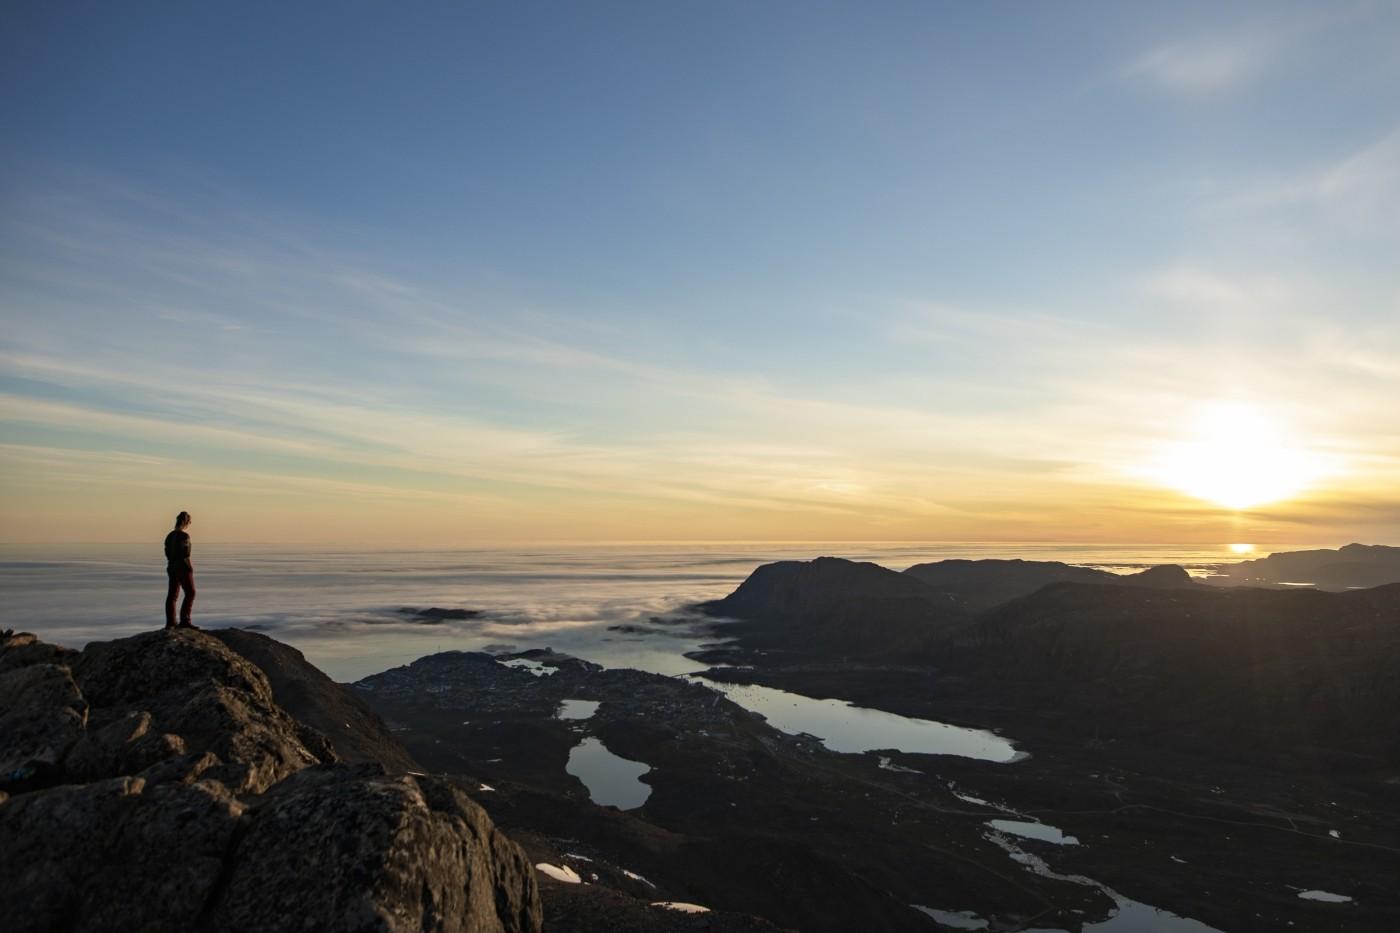 Stand above the clouds at mountain Nasaasaaq. Photo by Aningaaq R Carlsen - Visit Greenland